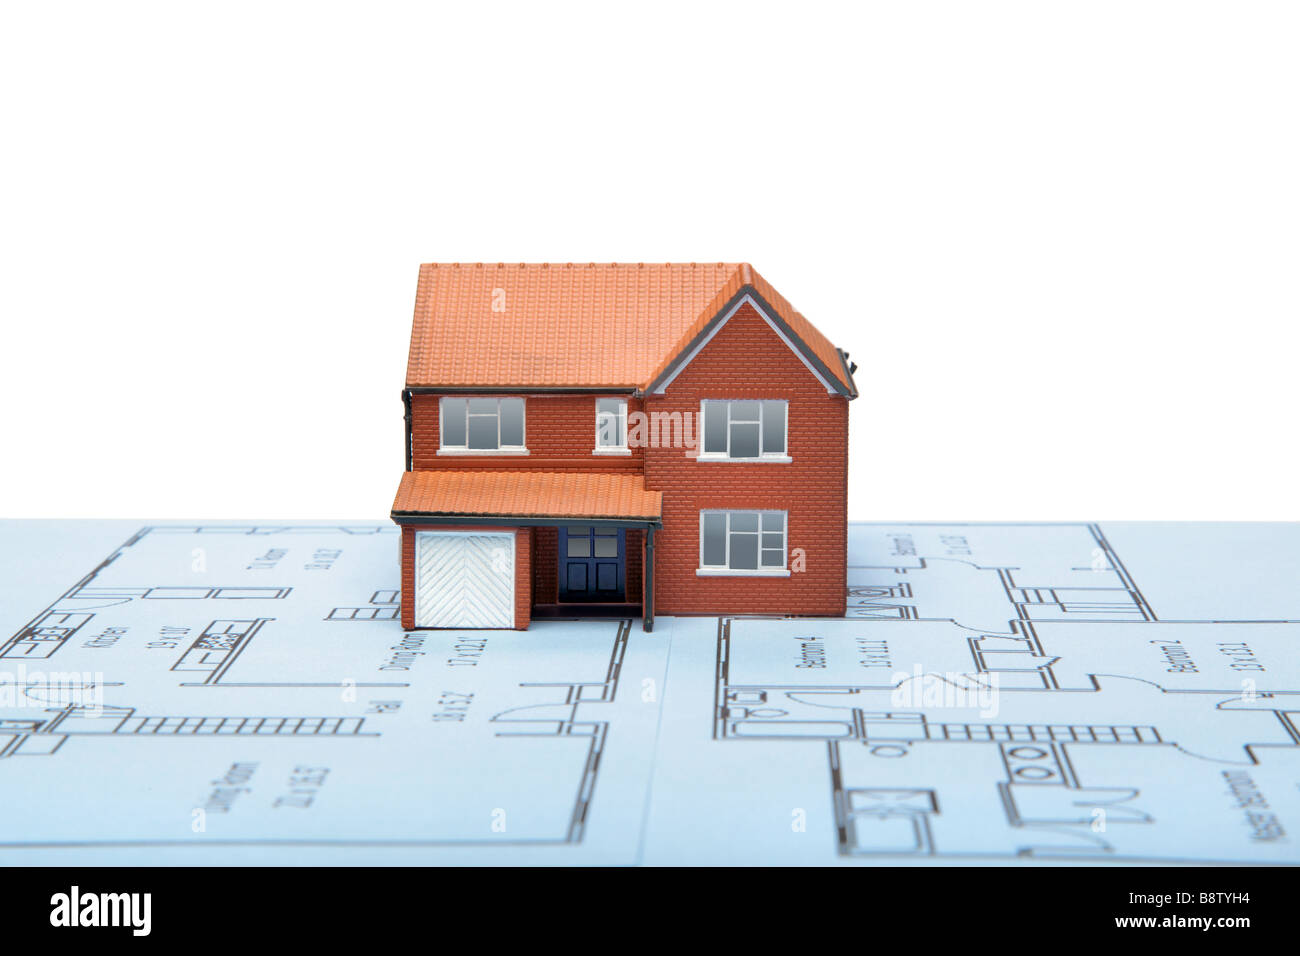 A model house on blueprints with white background Stock Photo